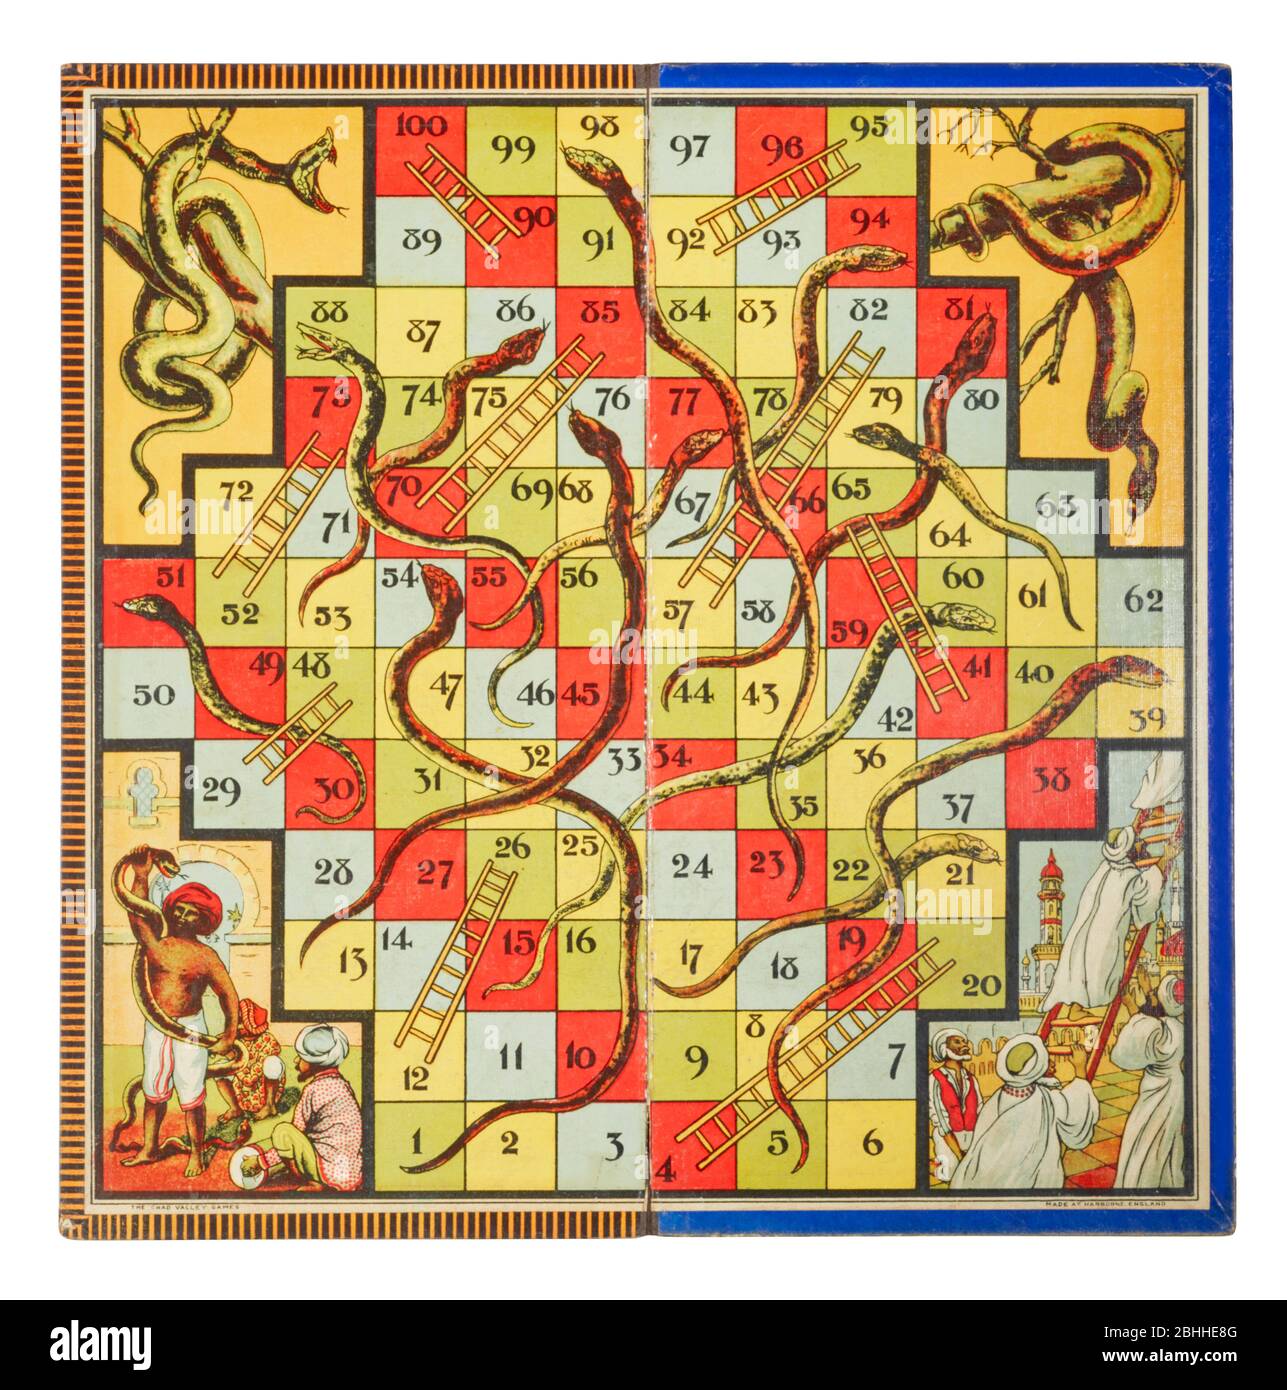 Inside of historical snakes and ladders board game with Indian themed illustrations Stock Photo